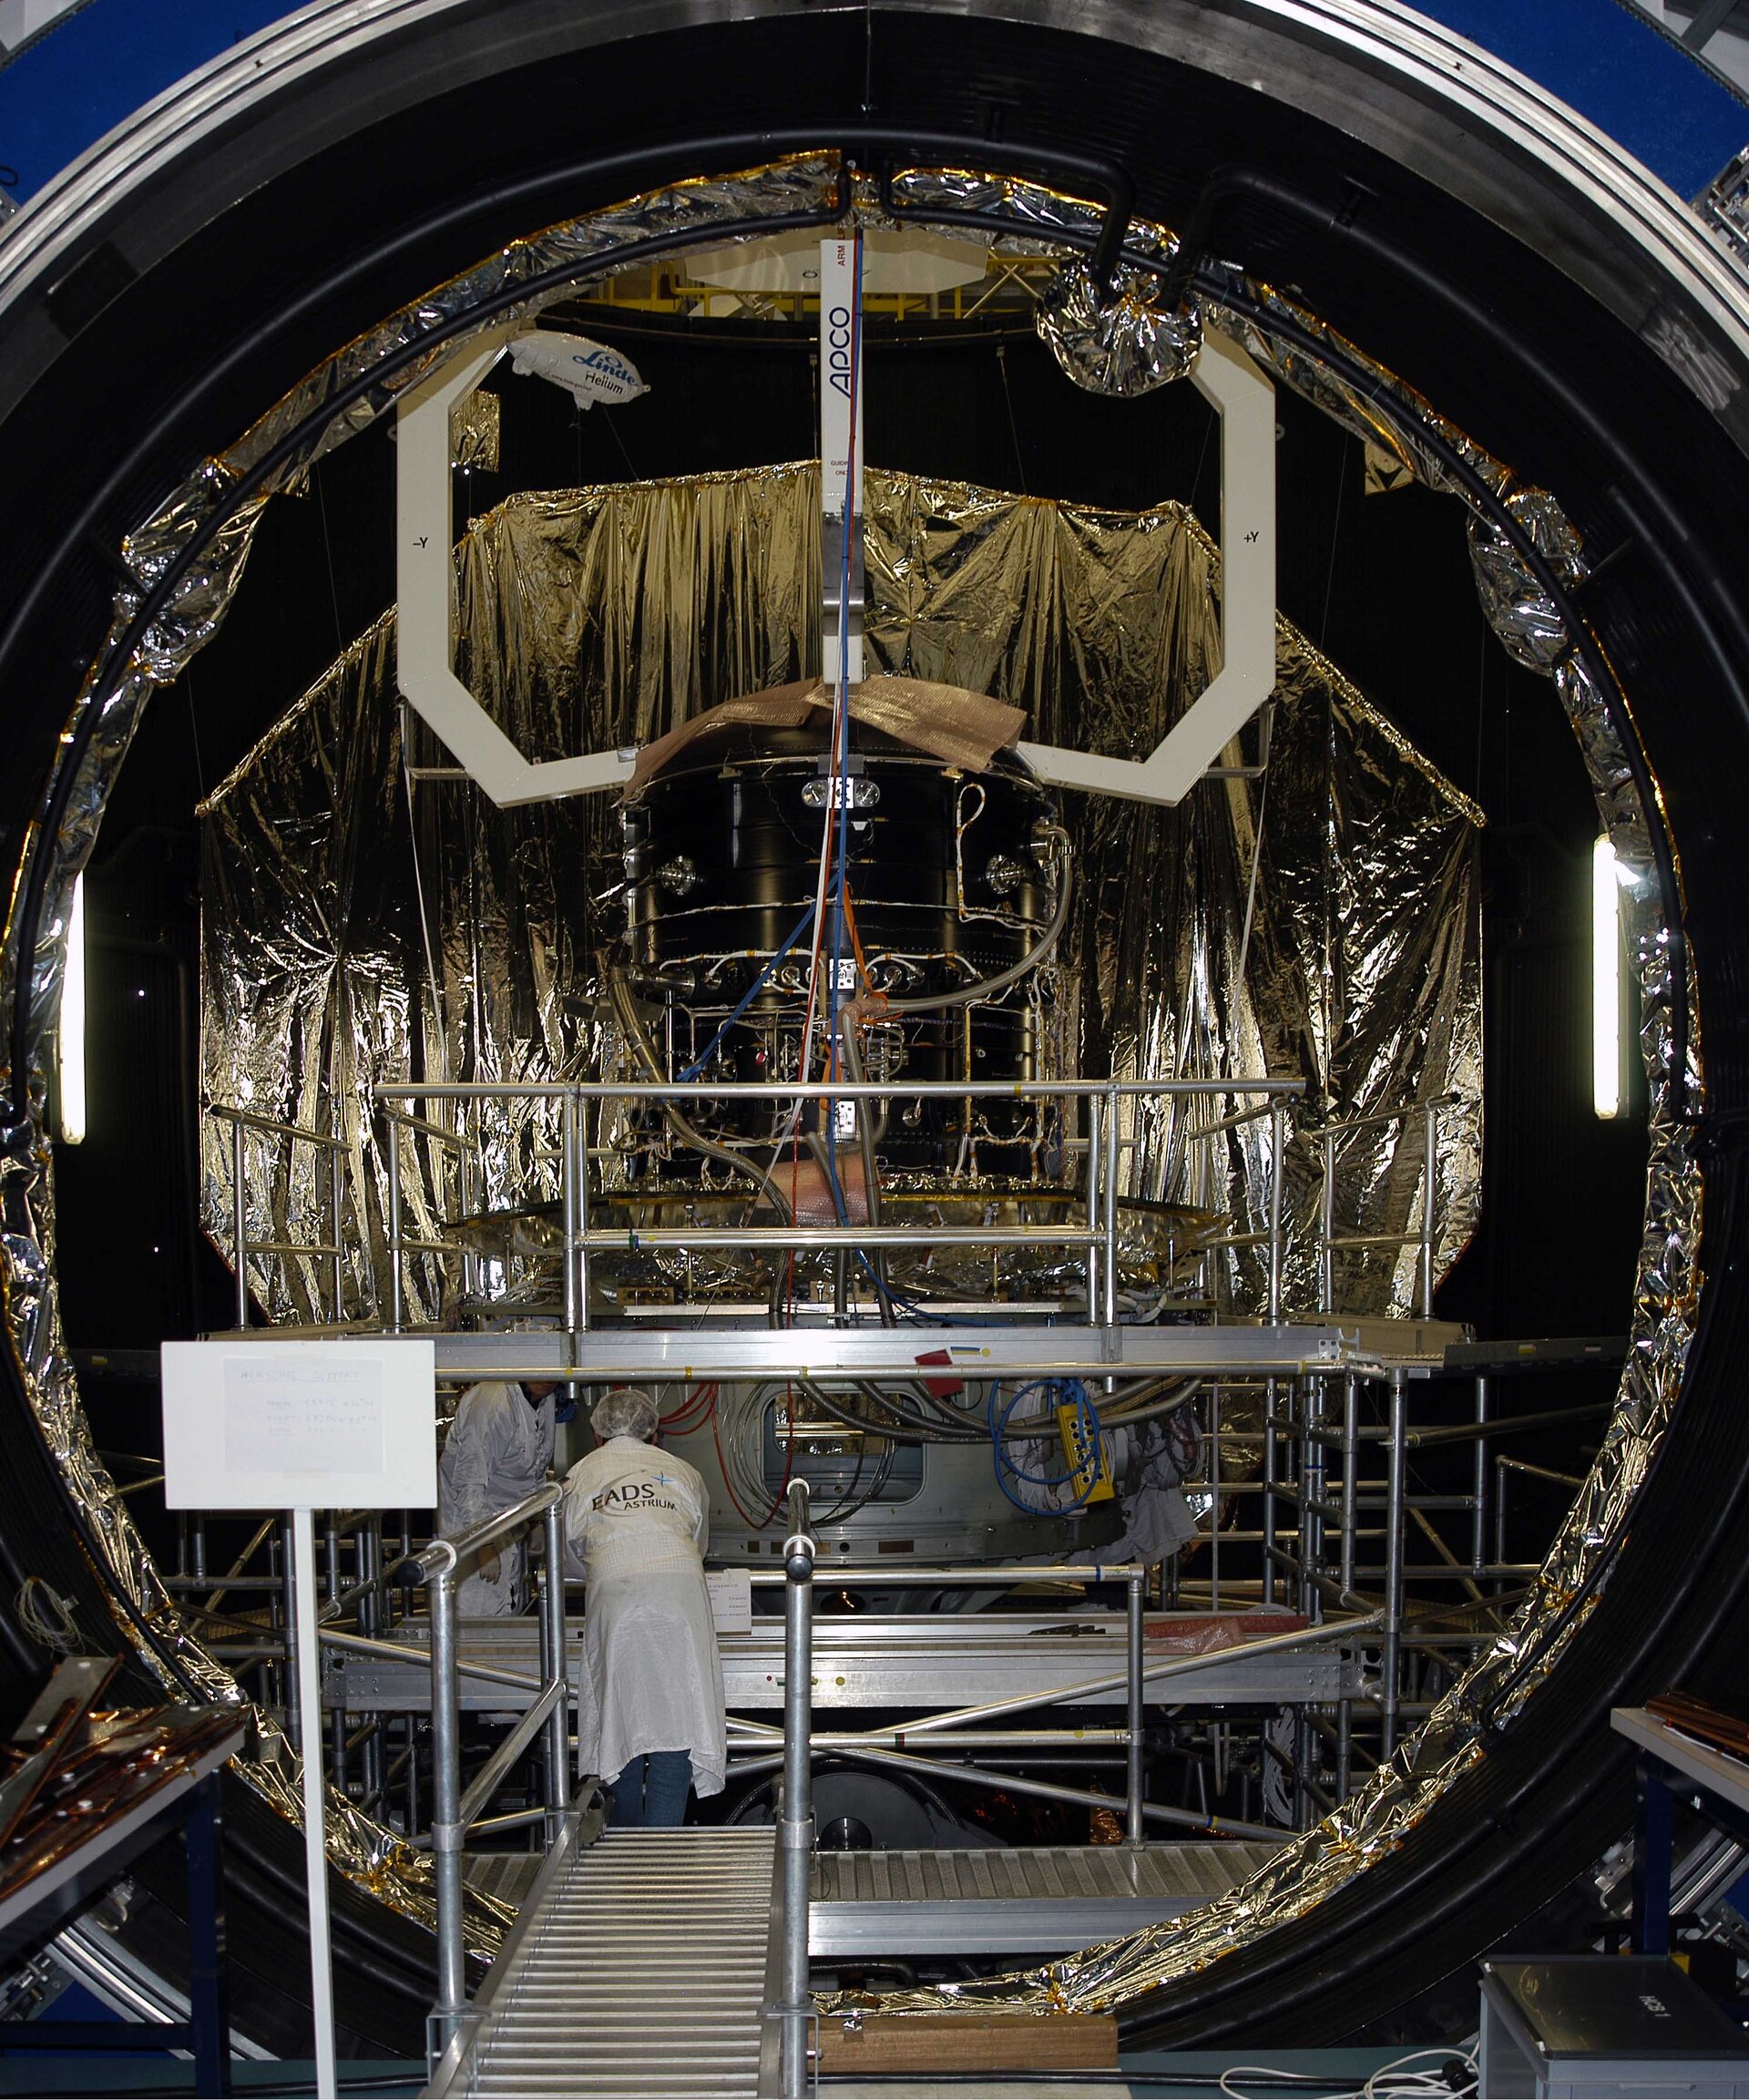 Front view of the cryostat through the main door of the Large Space Simulator